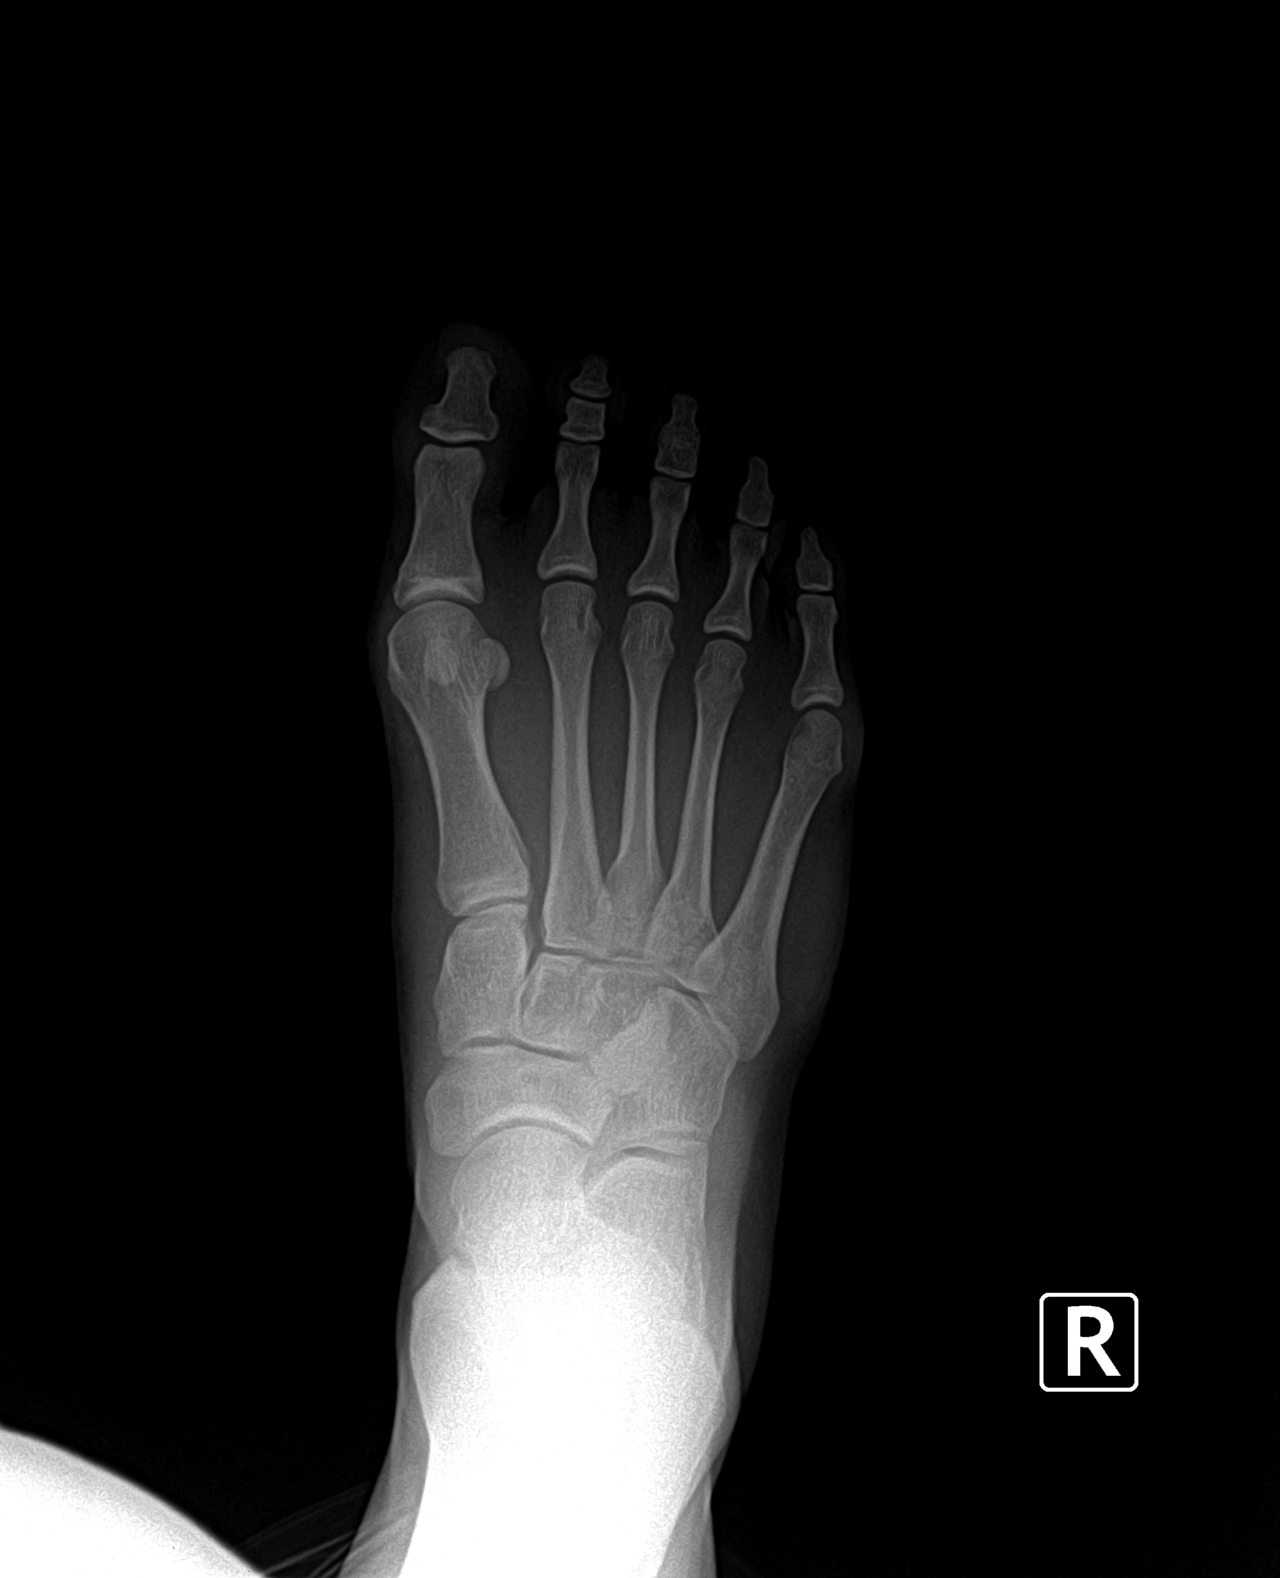 Preoperateive x ray of the bunion and tailor's bunion.